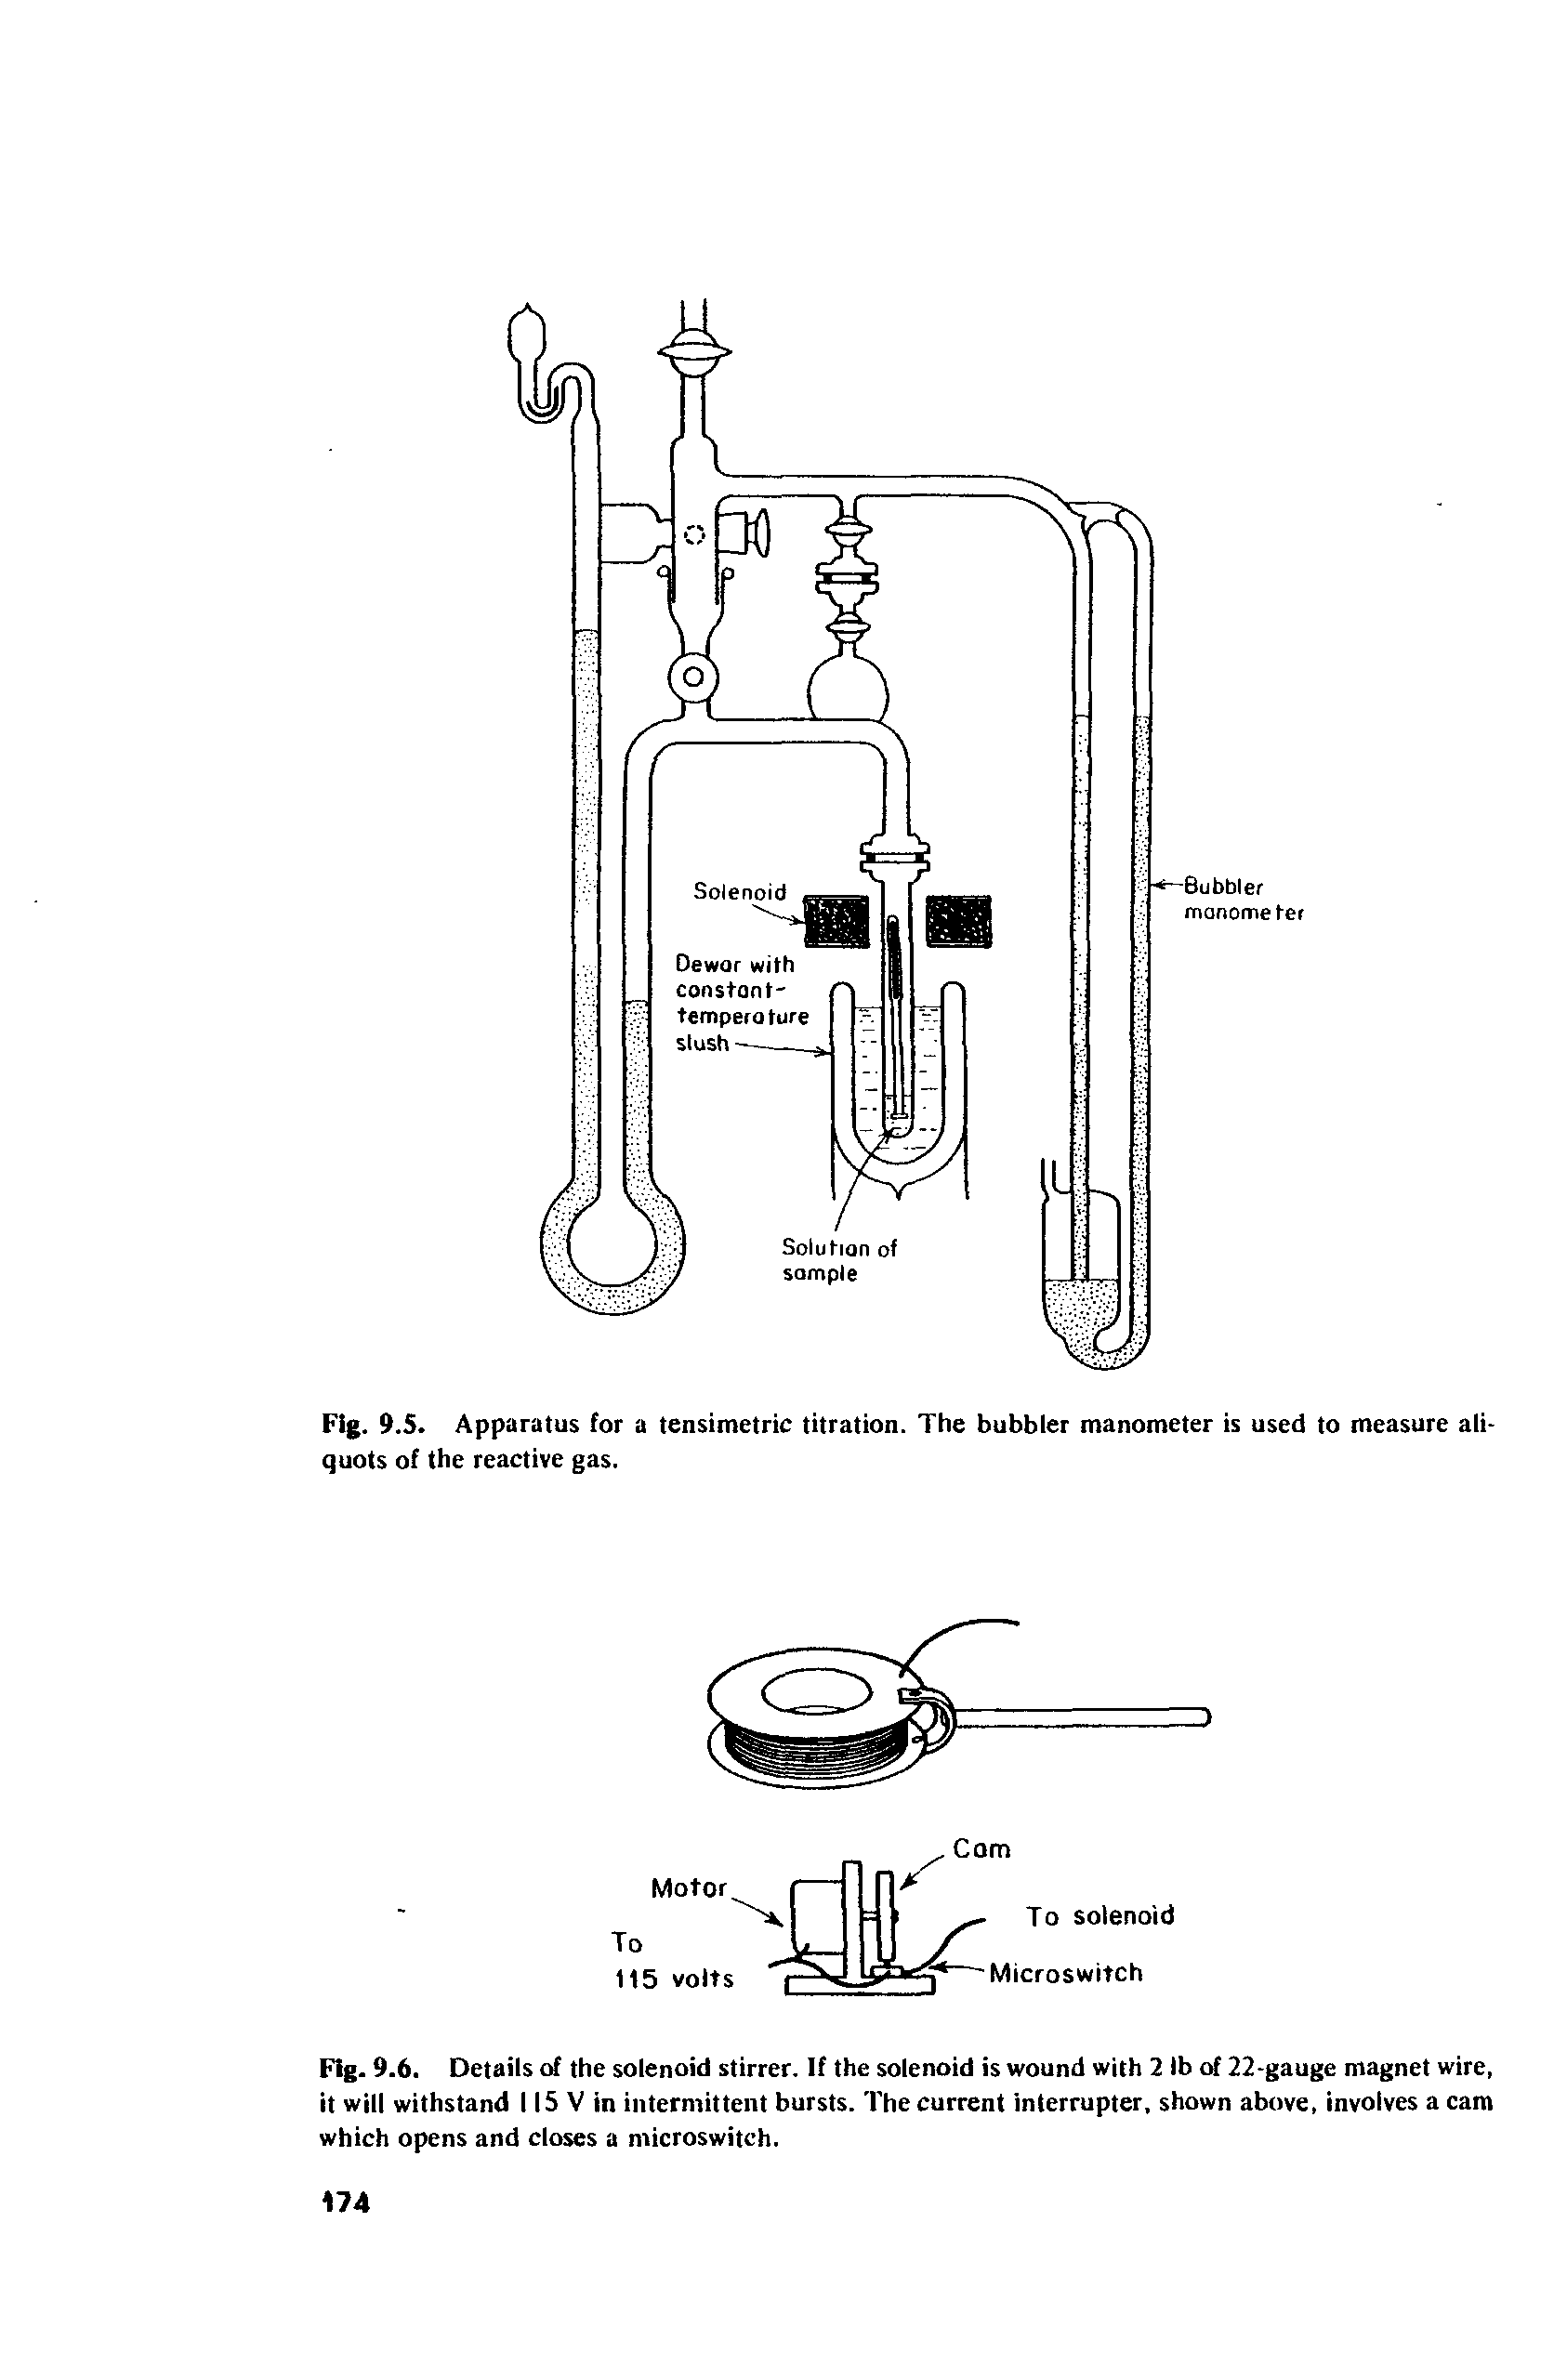 Fig. 9.6. Details of the solenoid stirrer. If the solenoid is wound with 2 lb of 22-gauge magnet wire, it will withstand 115 V in intermittent bursts. The current interrupter, shown above, involves a cam which opens and closes a microswitch.